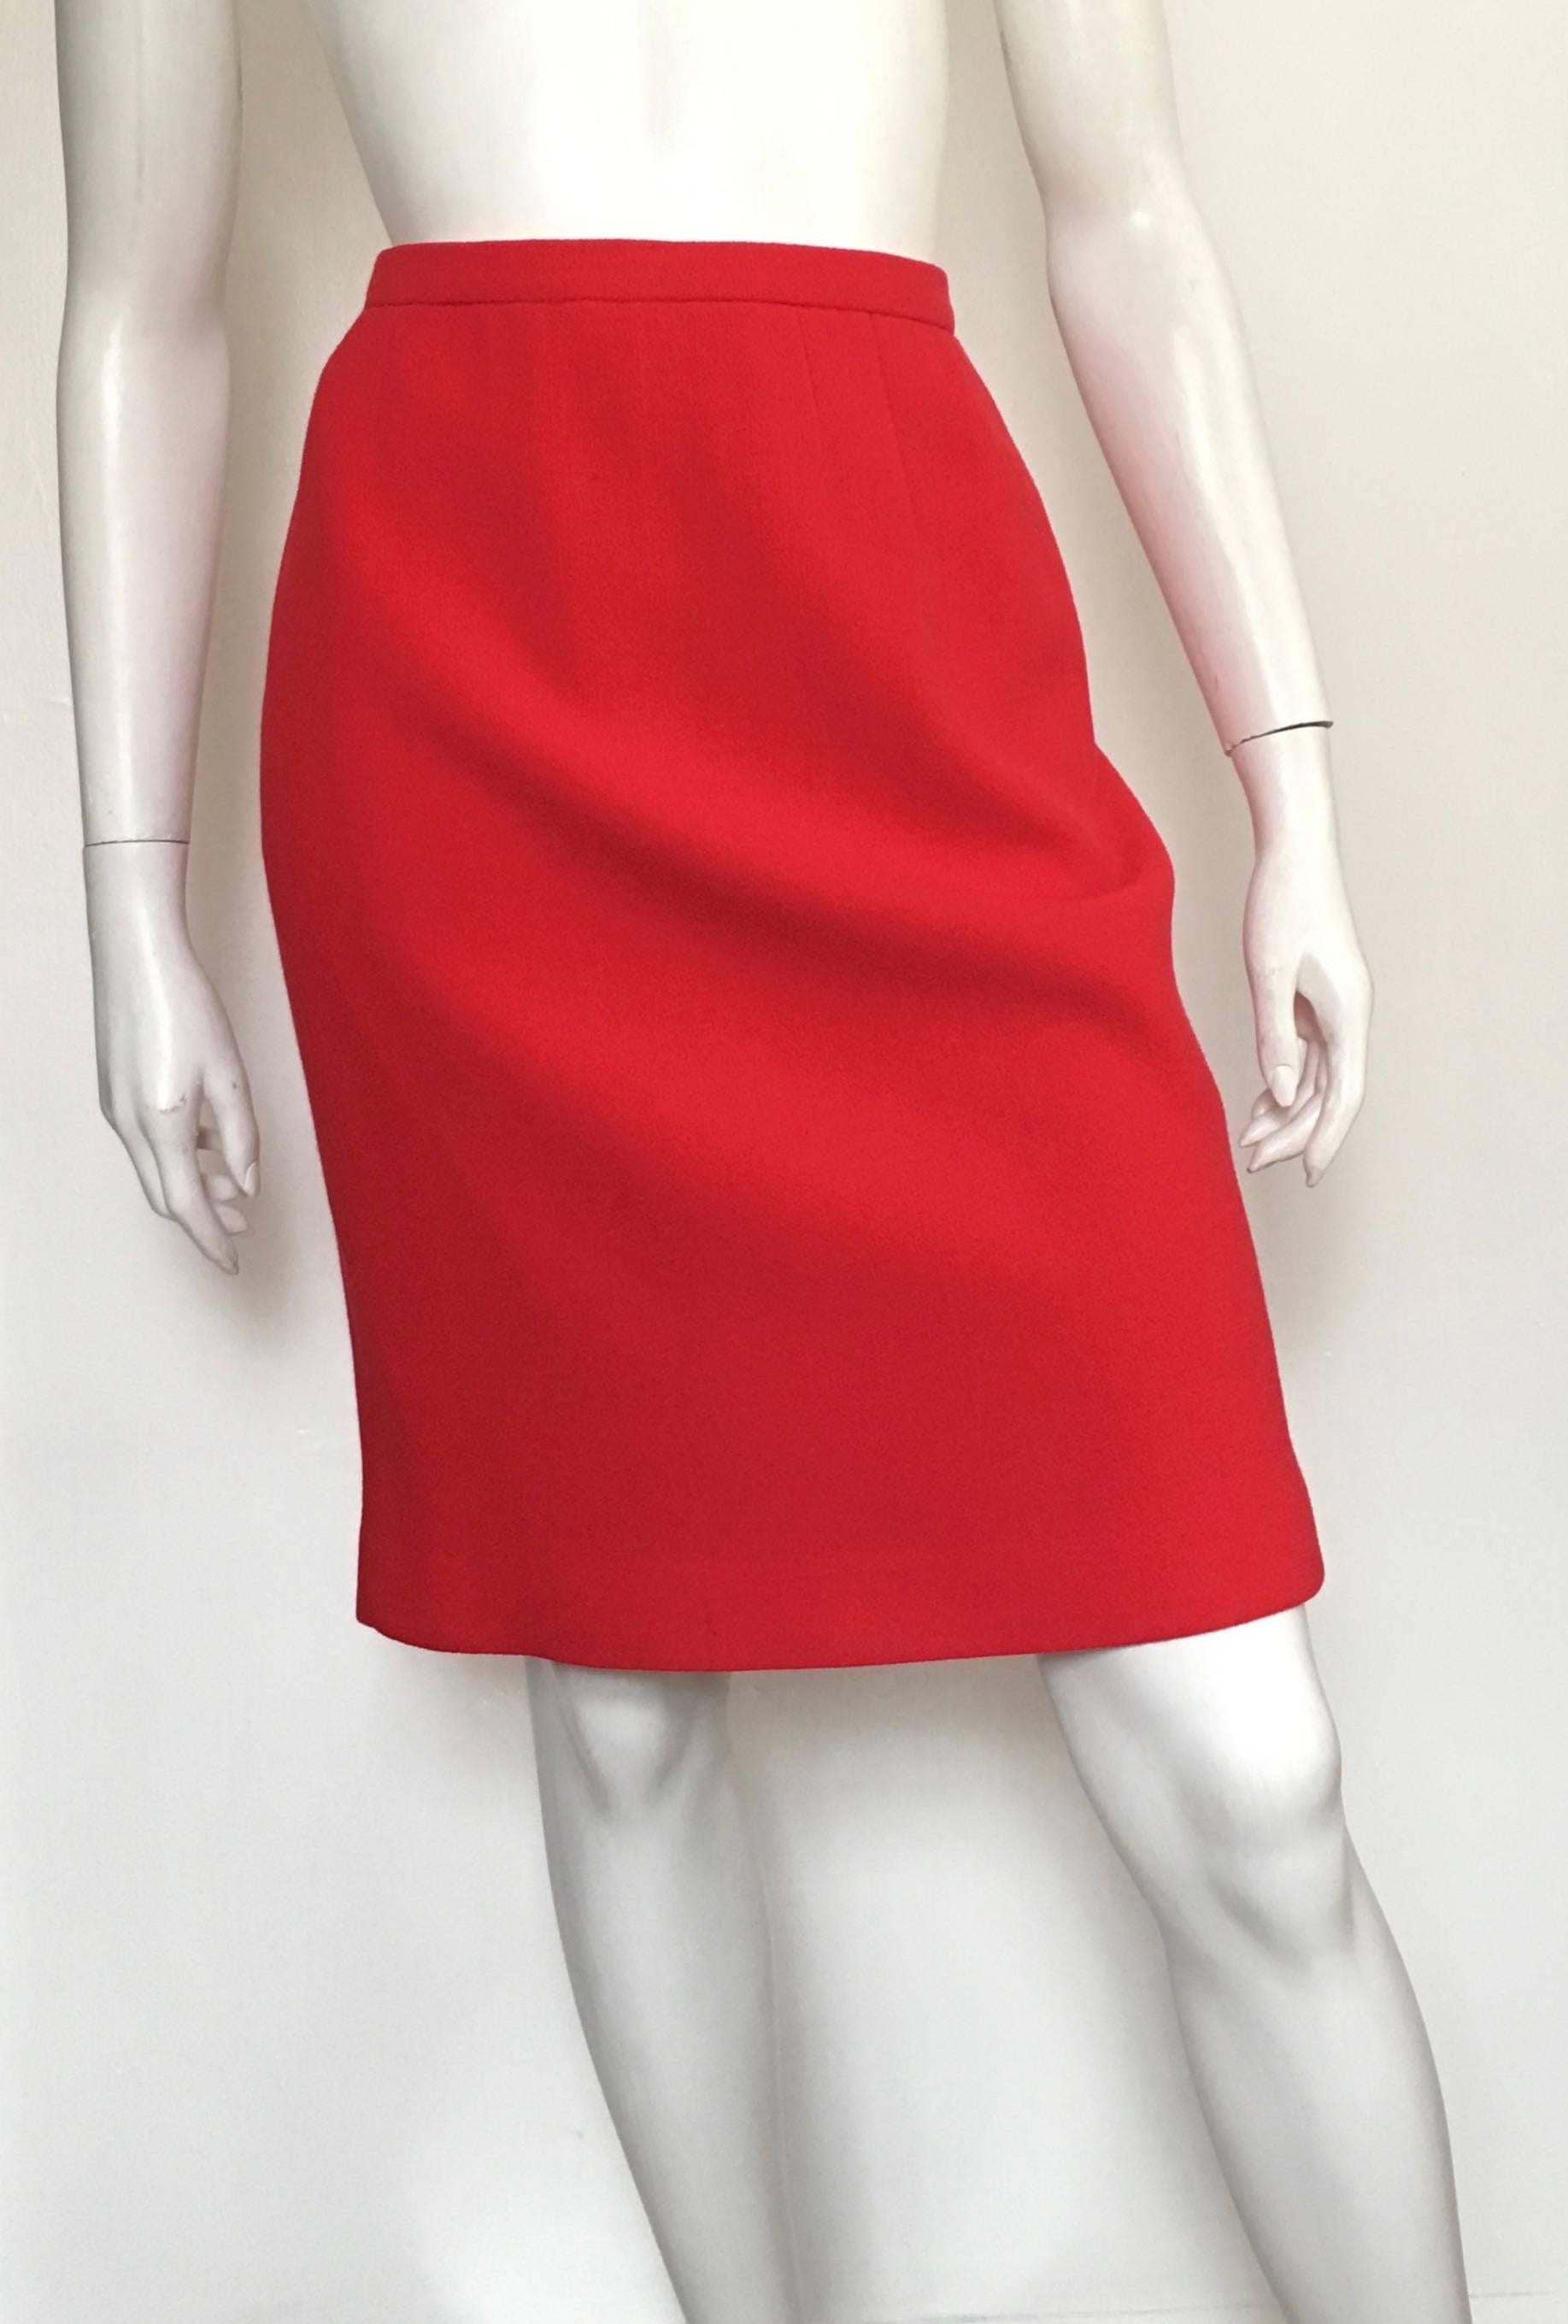 Emanuel Ungaro Red Power Wool Crepe Suit Size 6, 1990s For Sale 4